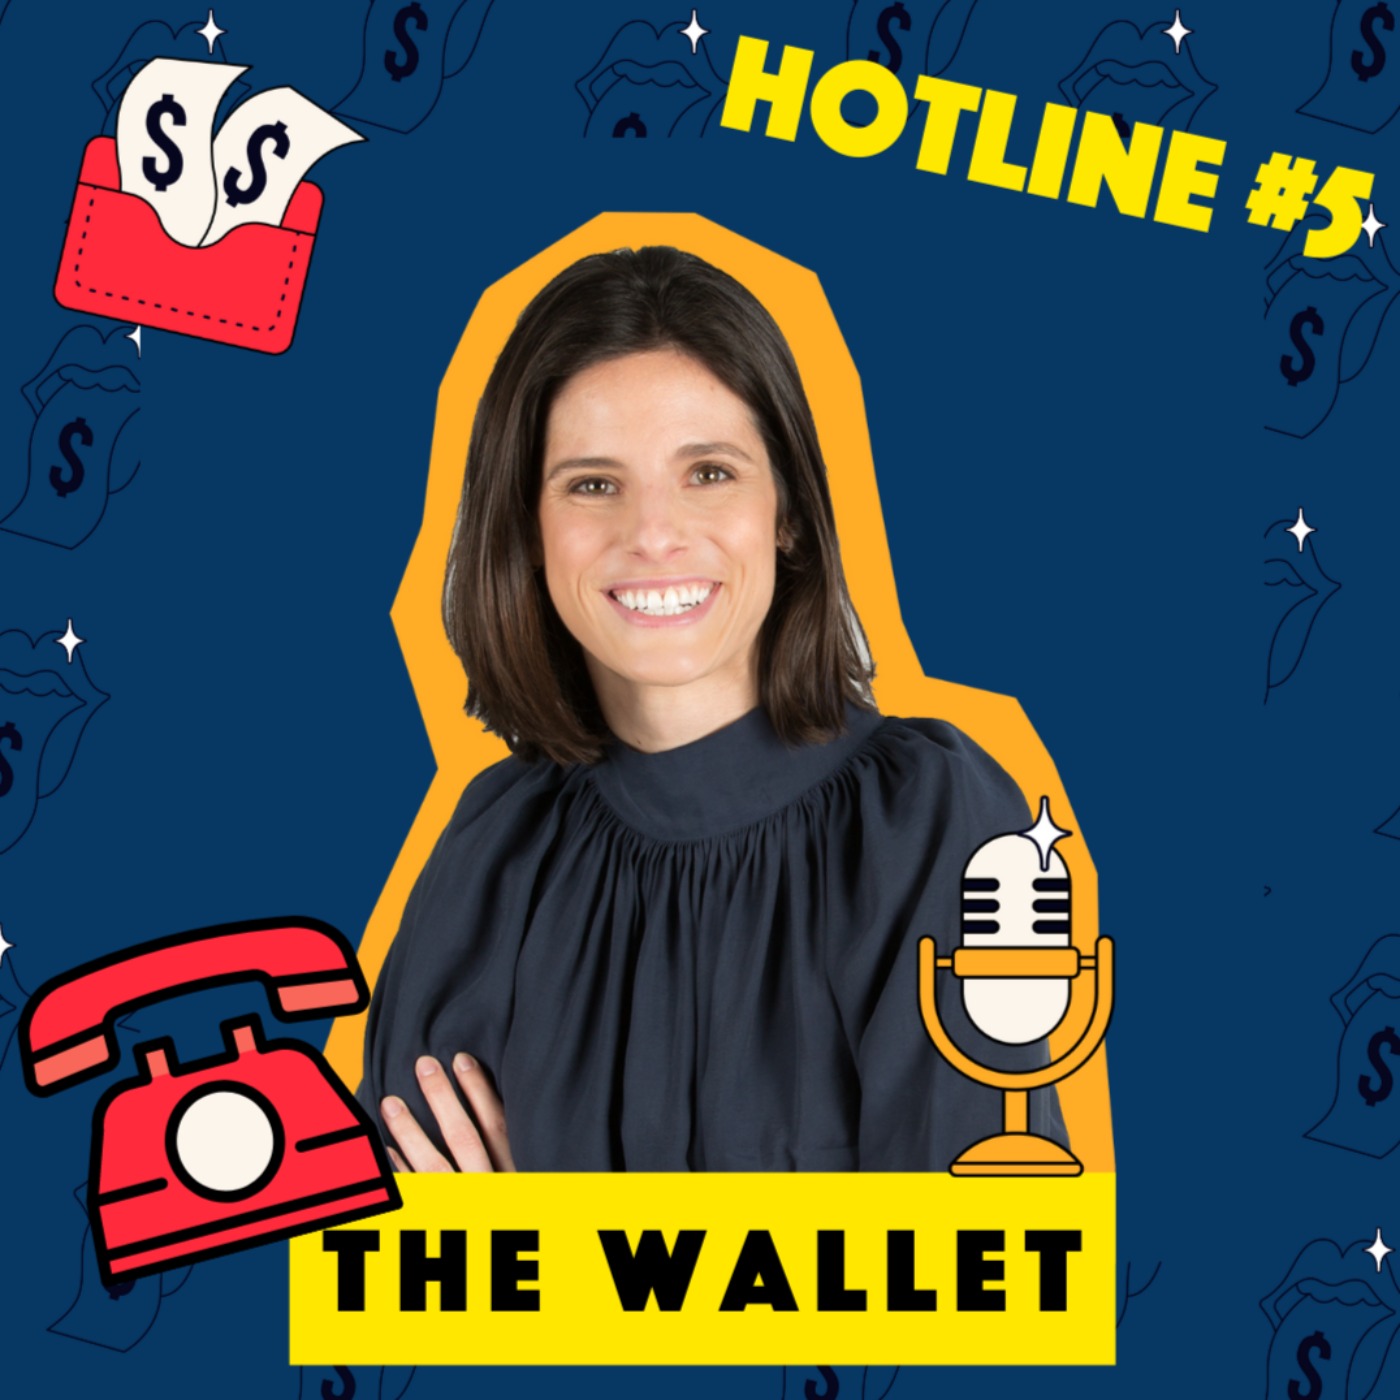 Should I use Buy Now Pay Later and Flexible Payment Schemes?  | Money Hotline #5